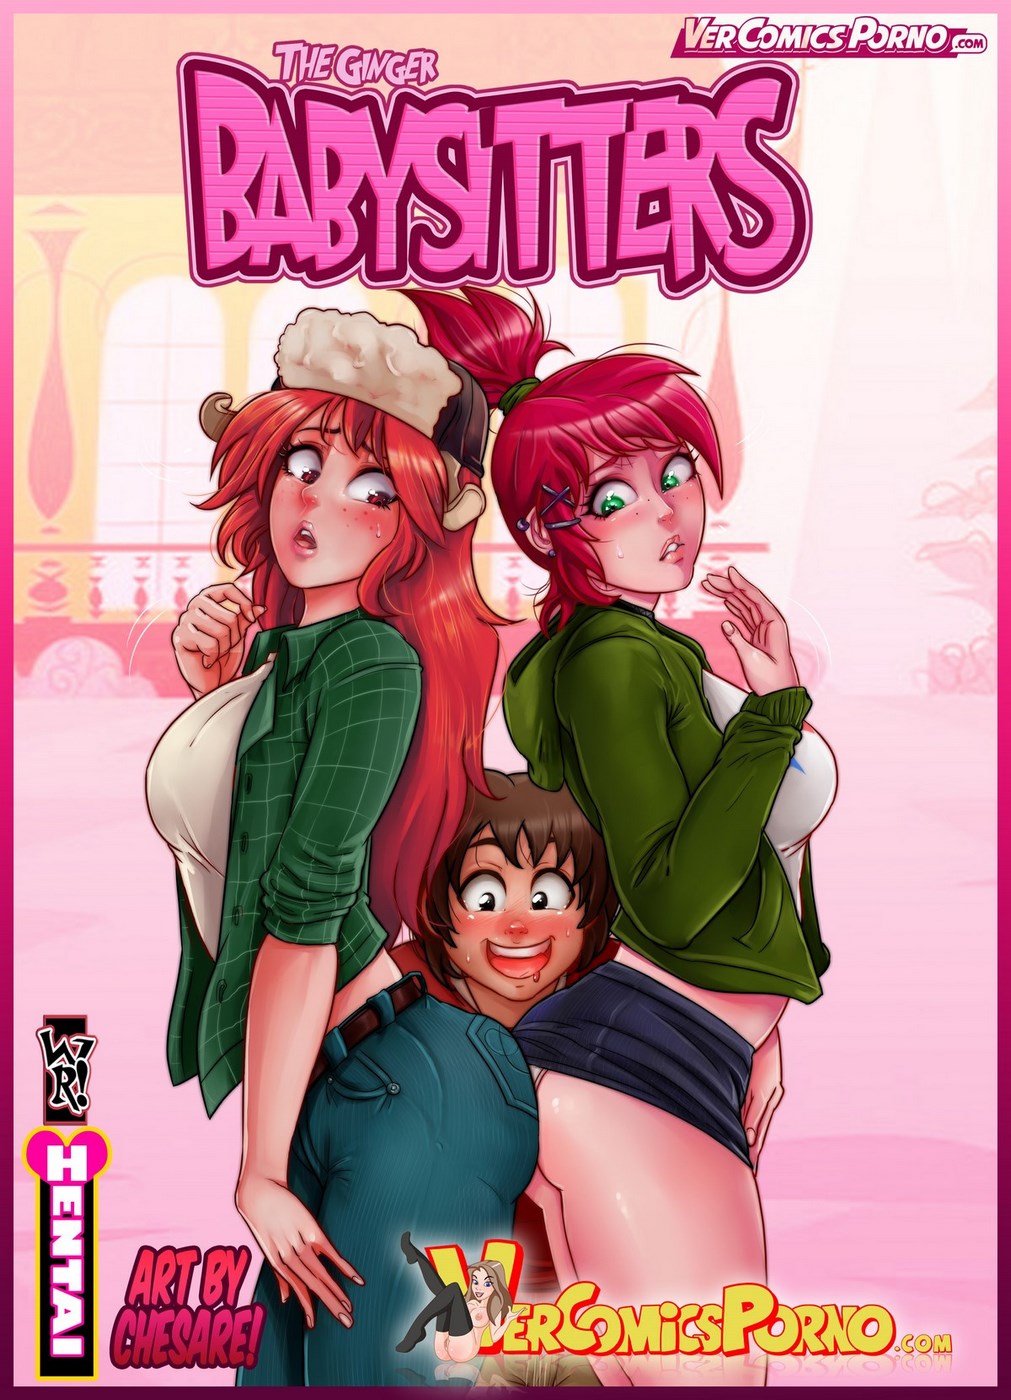 The Ginger Babysitters Chesare Xxx Toons Porn